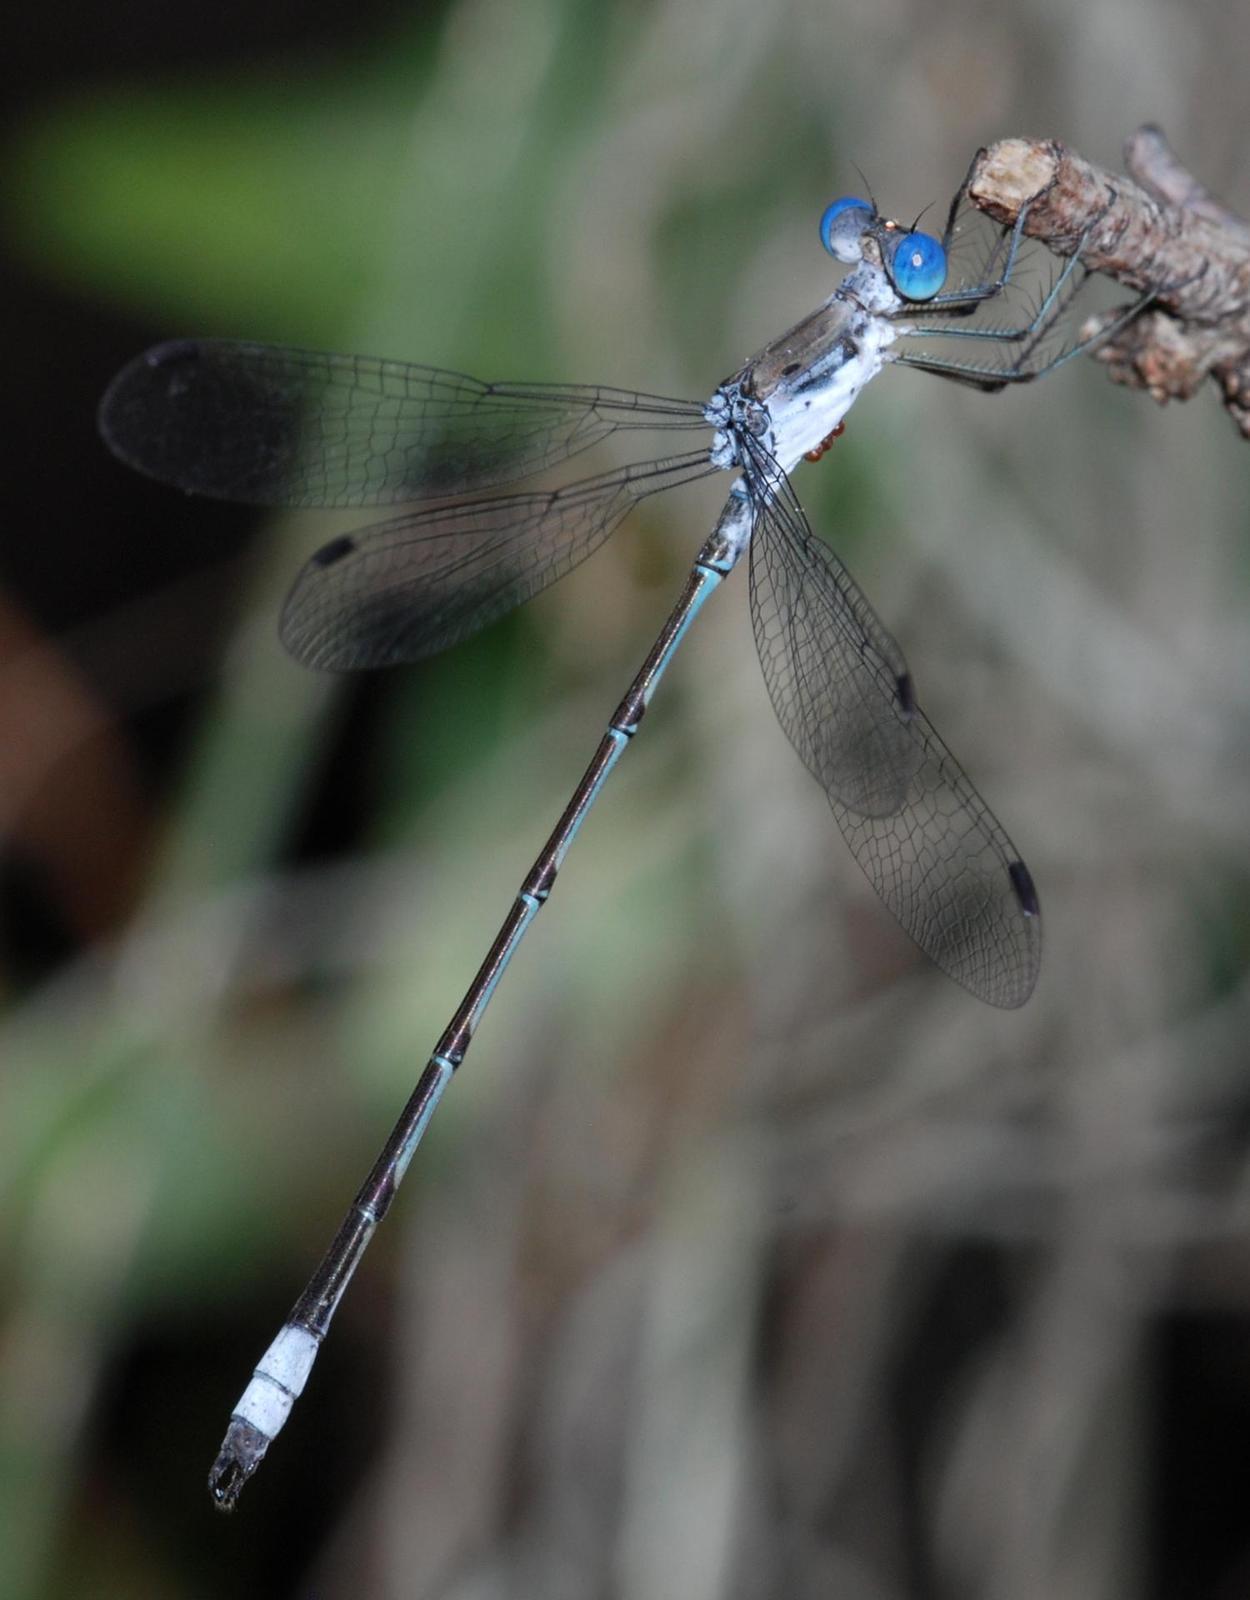 Chalky Spreadwing Photo by Robert Behrstock